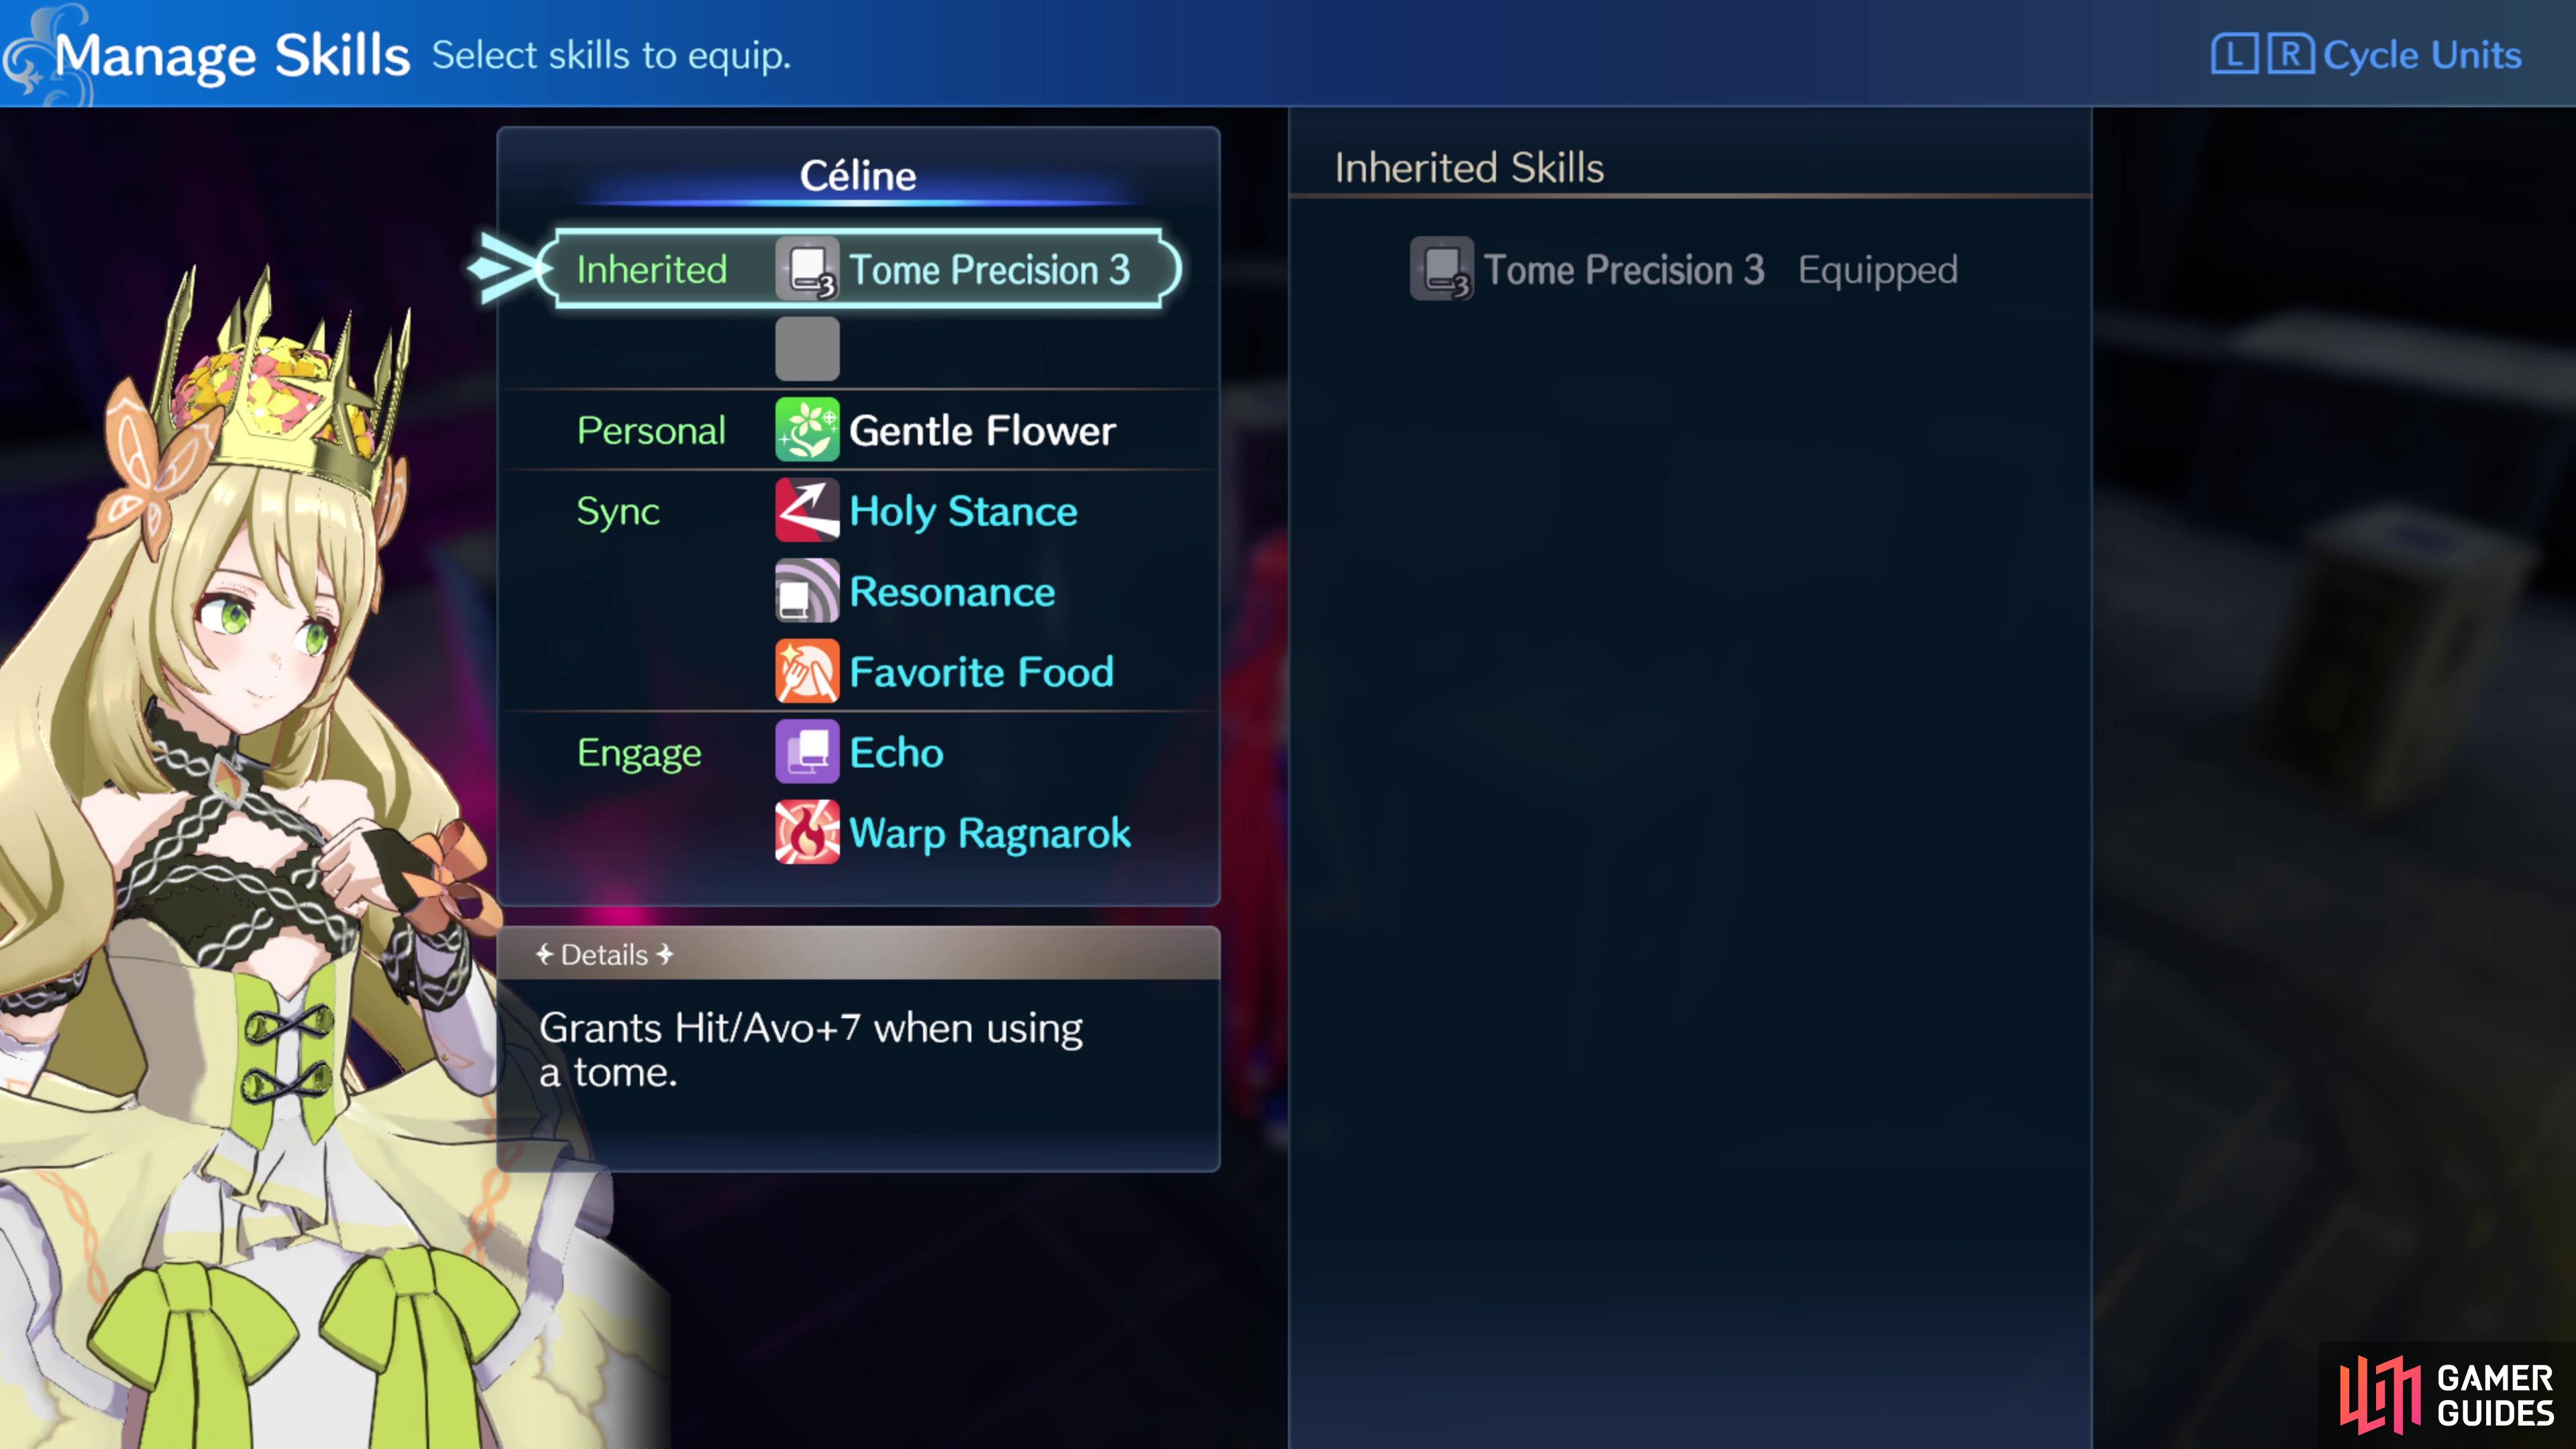 Enter the Inventory menu and pick the option “Manage Skills” to equip any Inherited Skills you’ve purchased.